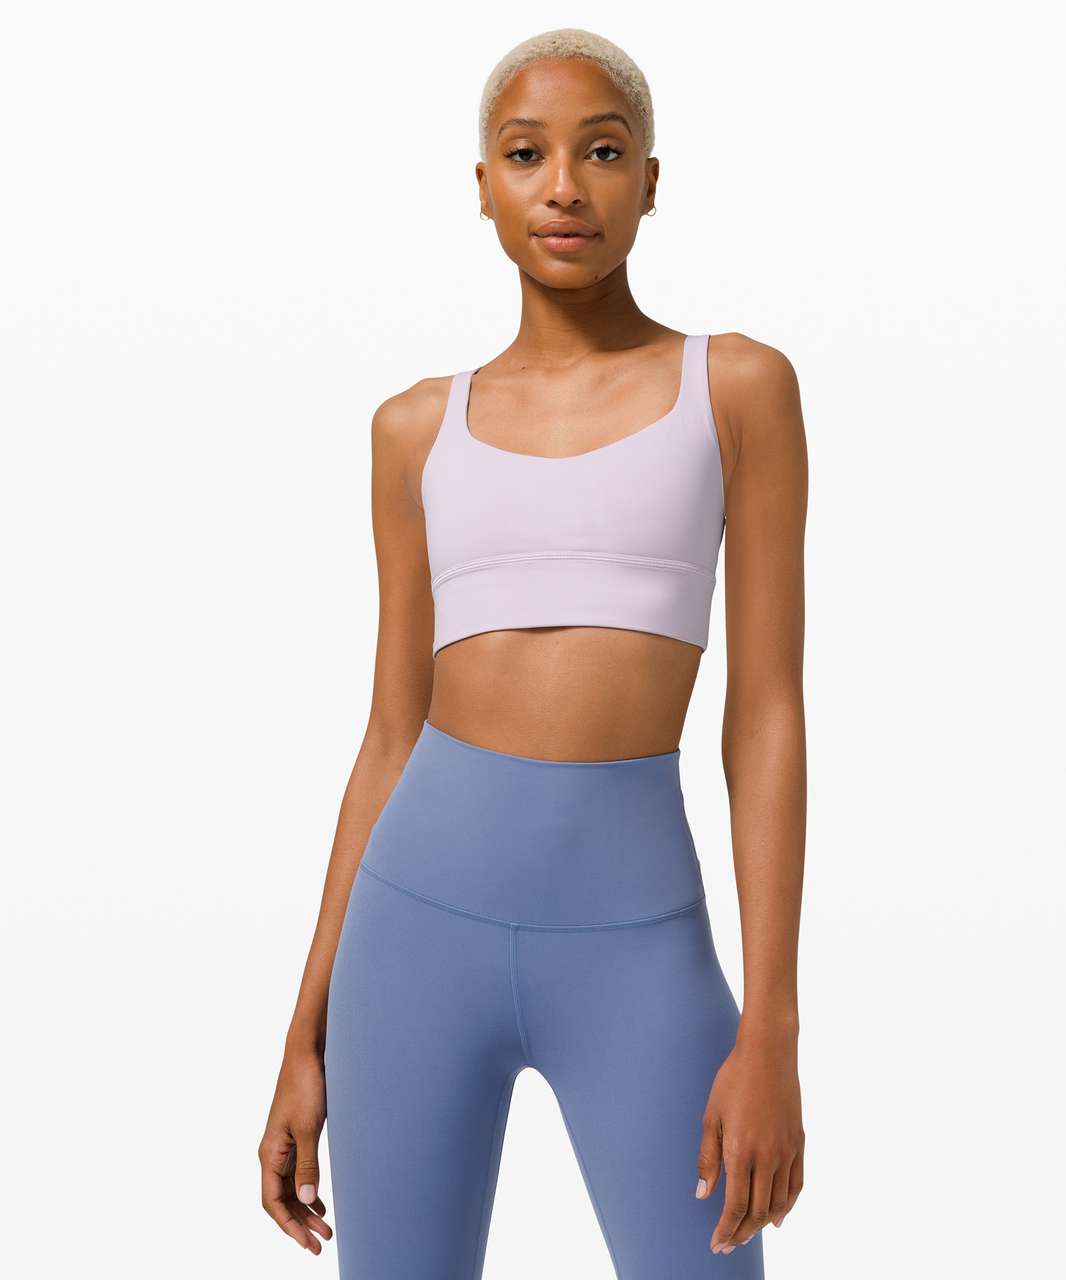 Lululemon Free to Be Long-Line Bra - Wild *Light Support, A/B Cups